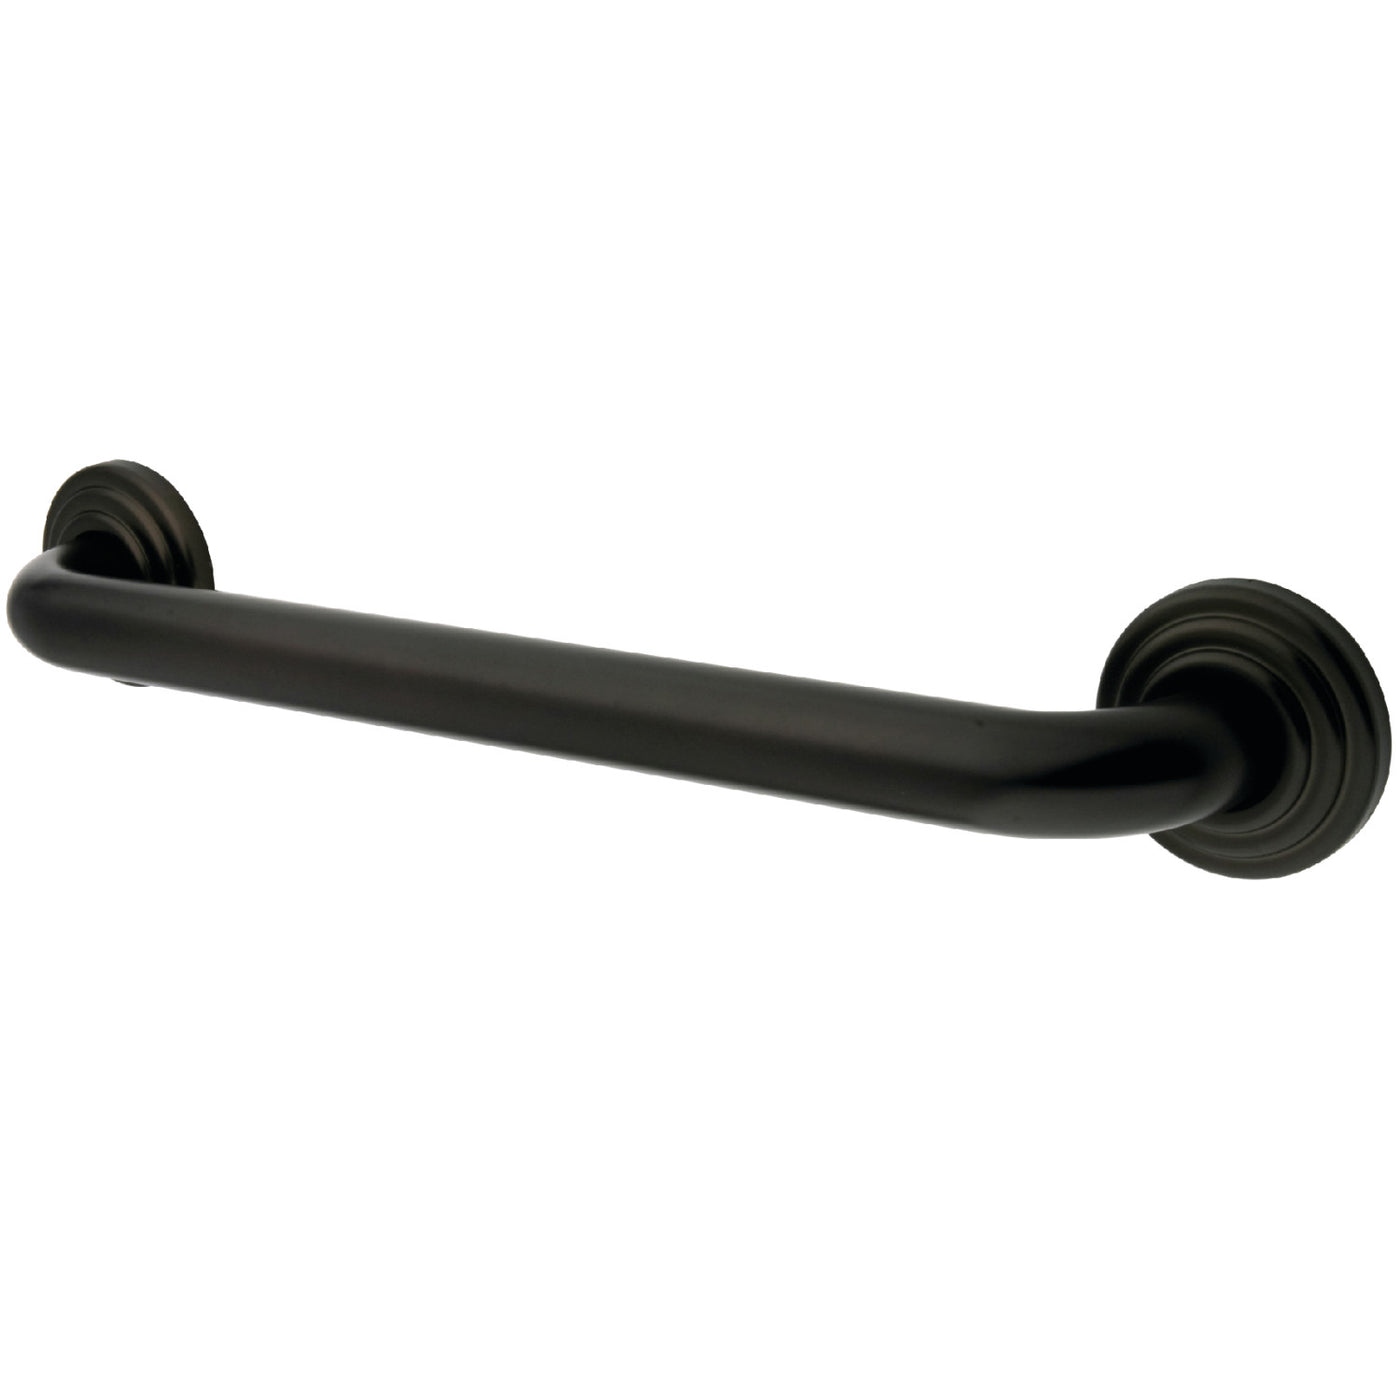 Elements of Design EDR314245 24-Inch X 1-1/4-Inch OD Grab Bar, Oil Rubbed Bronze